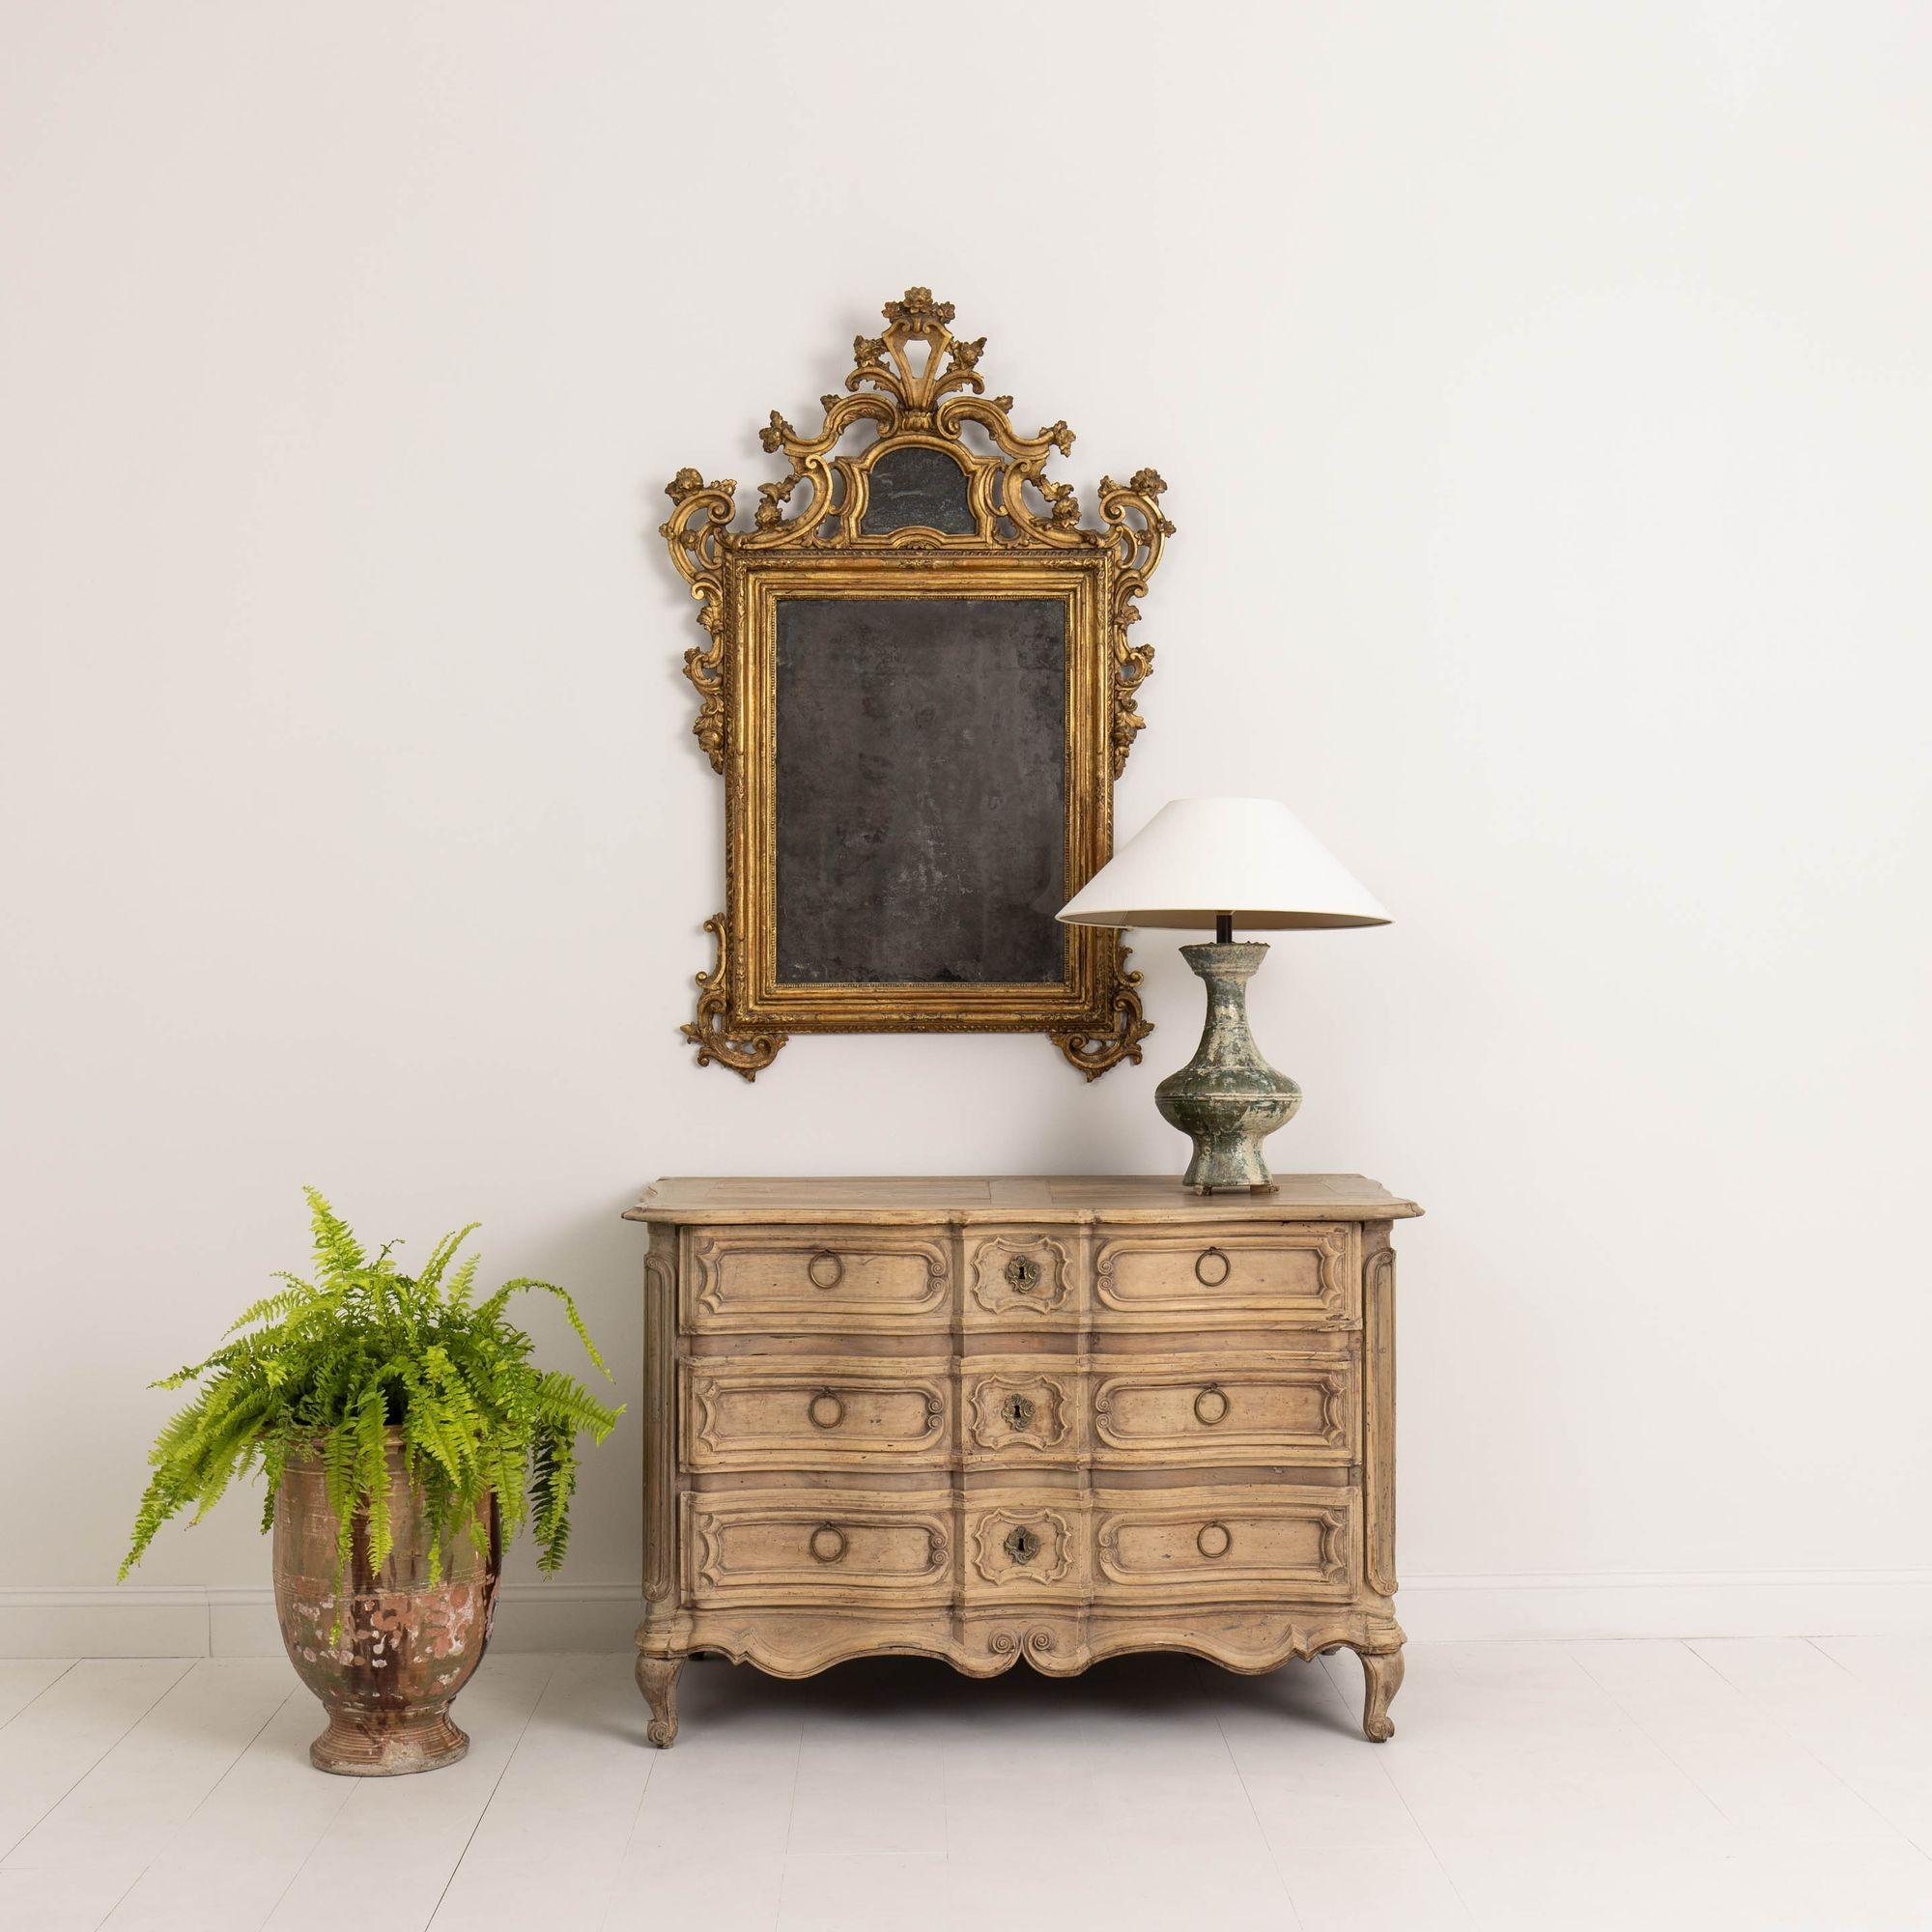 A large, antique chest of drawers with serpentine shape, circa 1770. This beautiful, hand-carved, bleached walnut commode has a shaped top, shaped recessed panel drawers, intricately carved side panels, scalloped apron and is raised upon short,